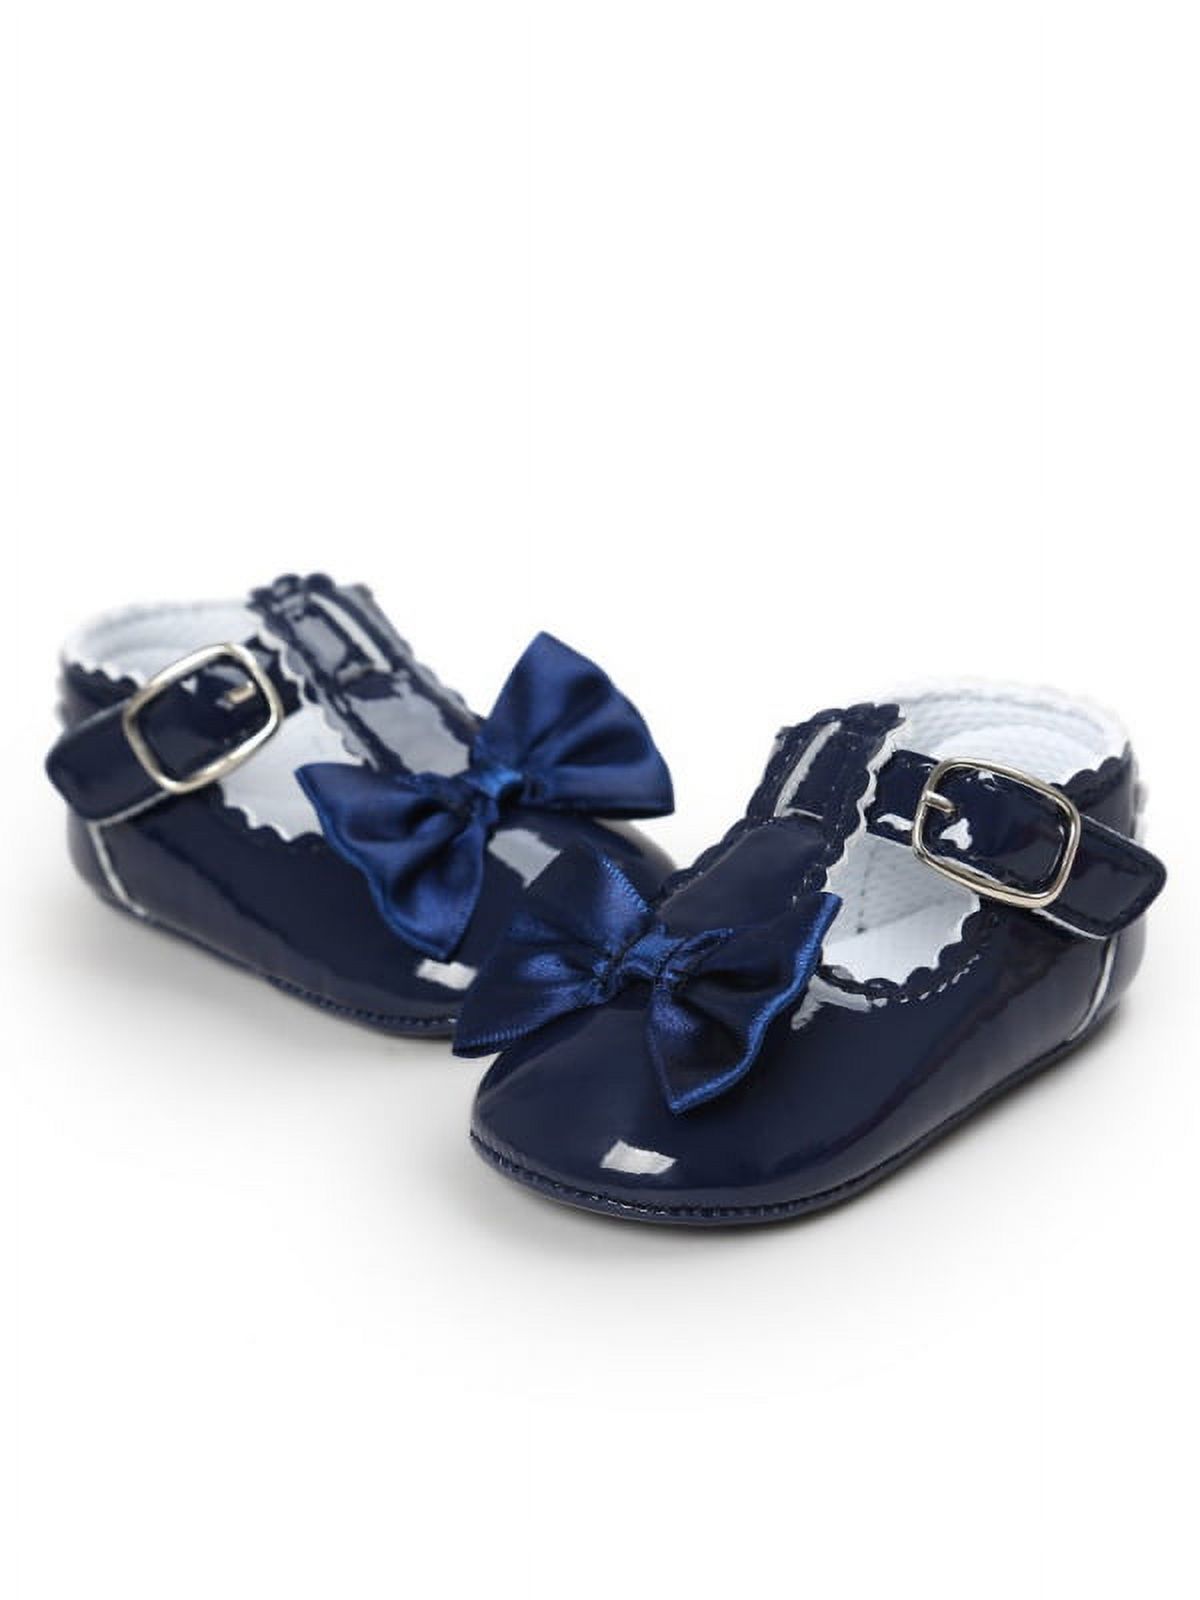 Lavaport Newborn Baby Girls Bowknot Shoes PU Leather Buckle First Walkers - image 3 of 5